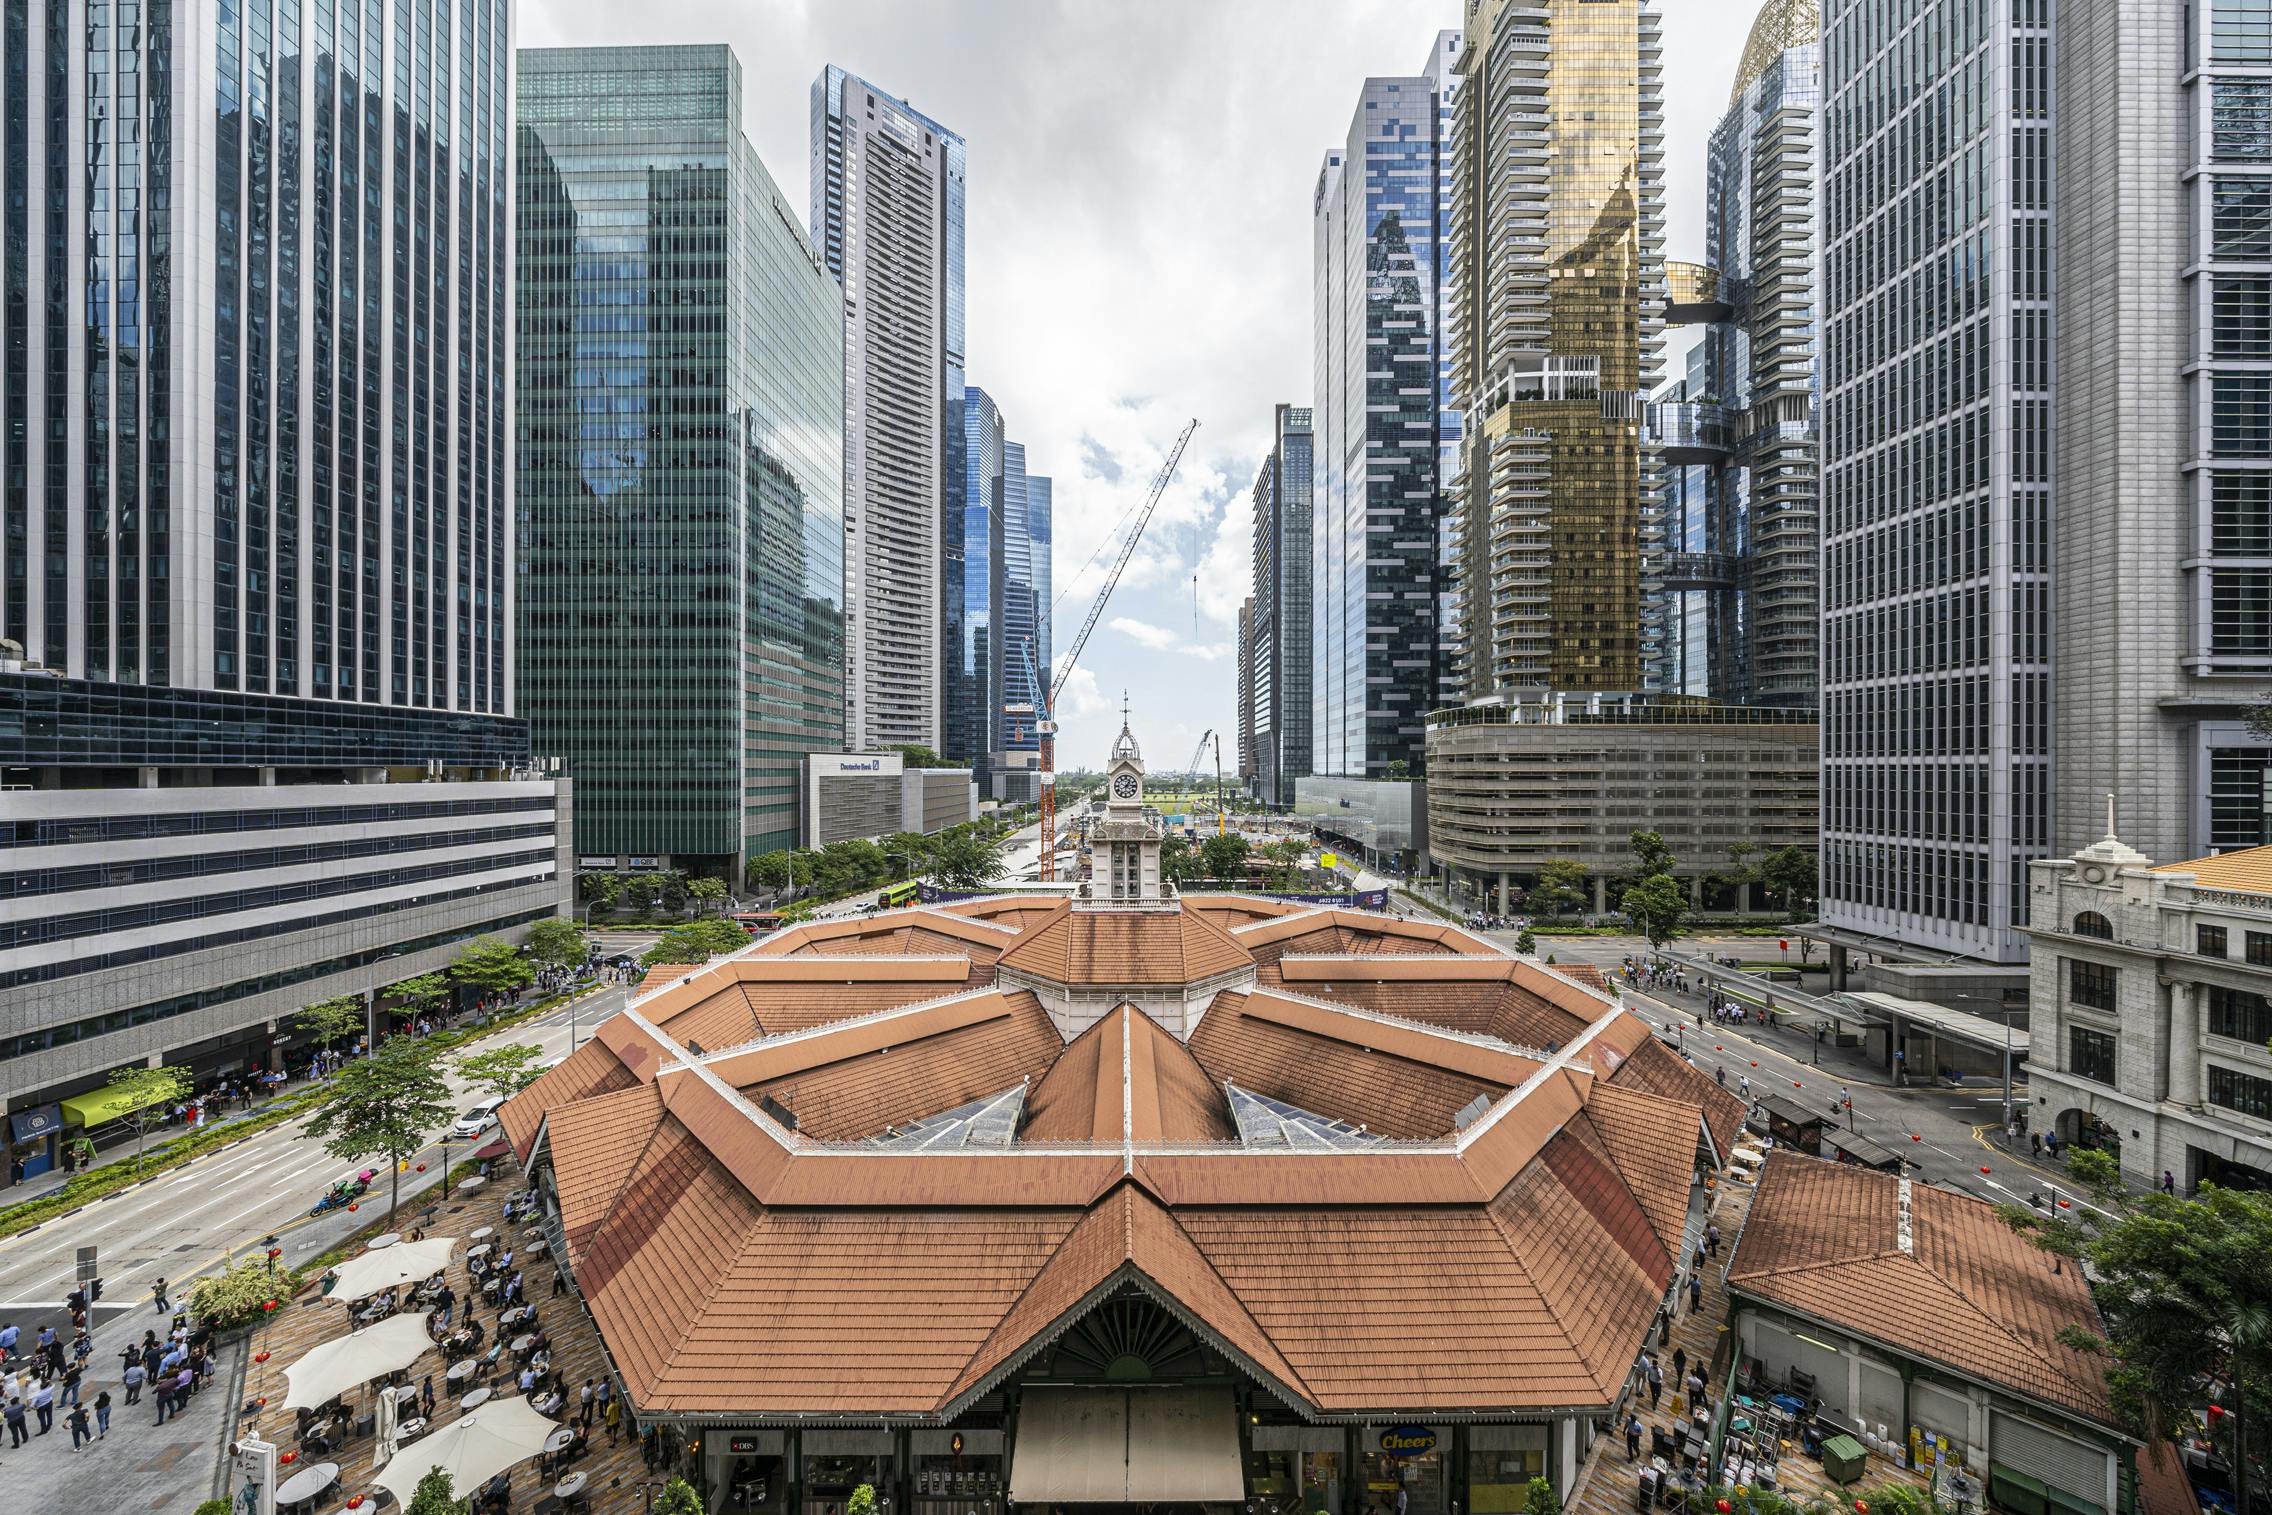 View of the top of Lau Pa Sat food centre from Robinson Suites in Singapore